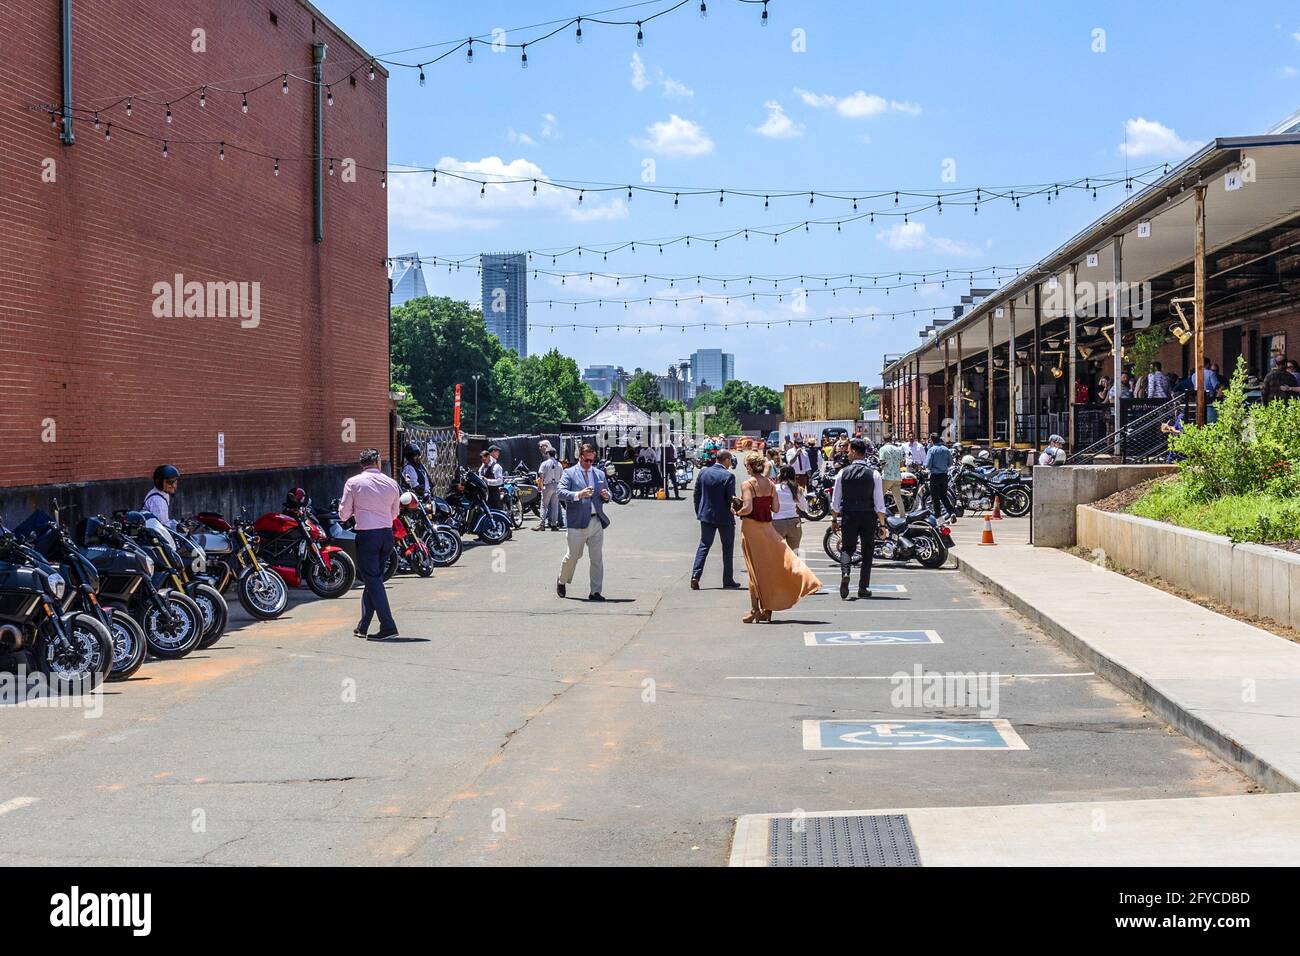 CHARLOTTE, NC, USA-23 MAY 2021: Camp North End. A well-dressed crowd among parked motorcycles socializing with City skyline in distance. Stock Photo